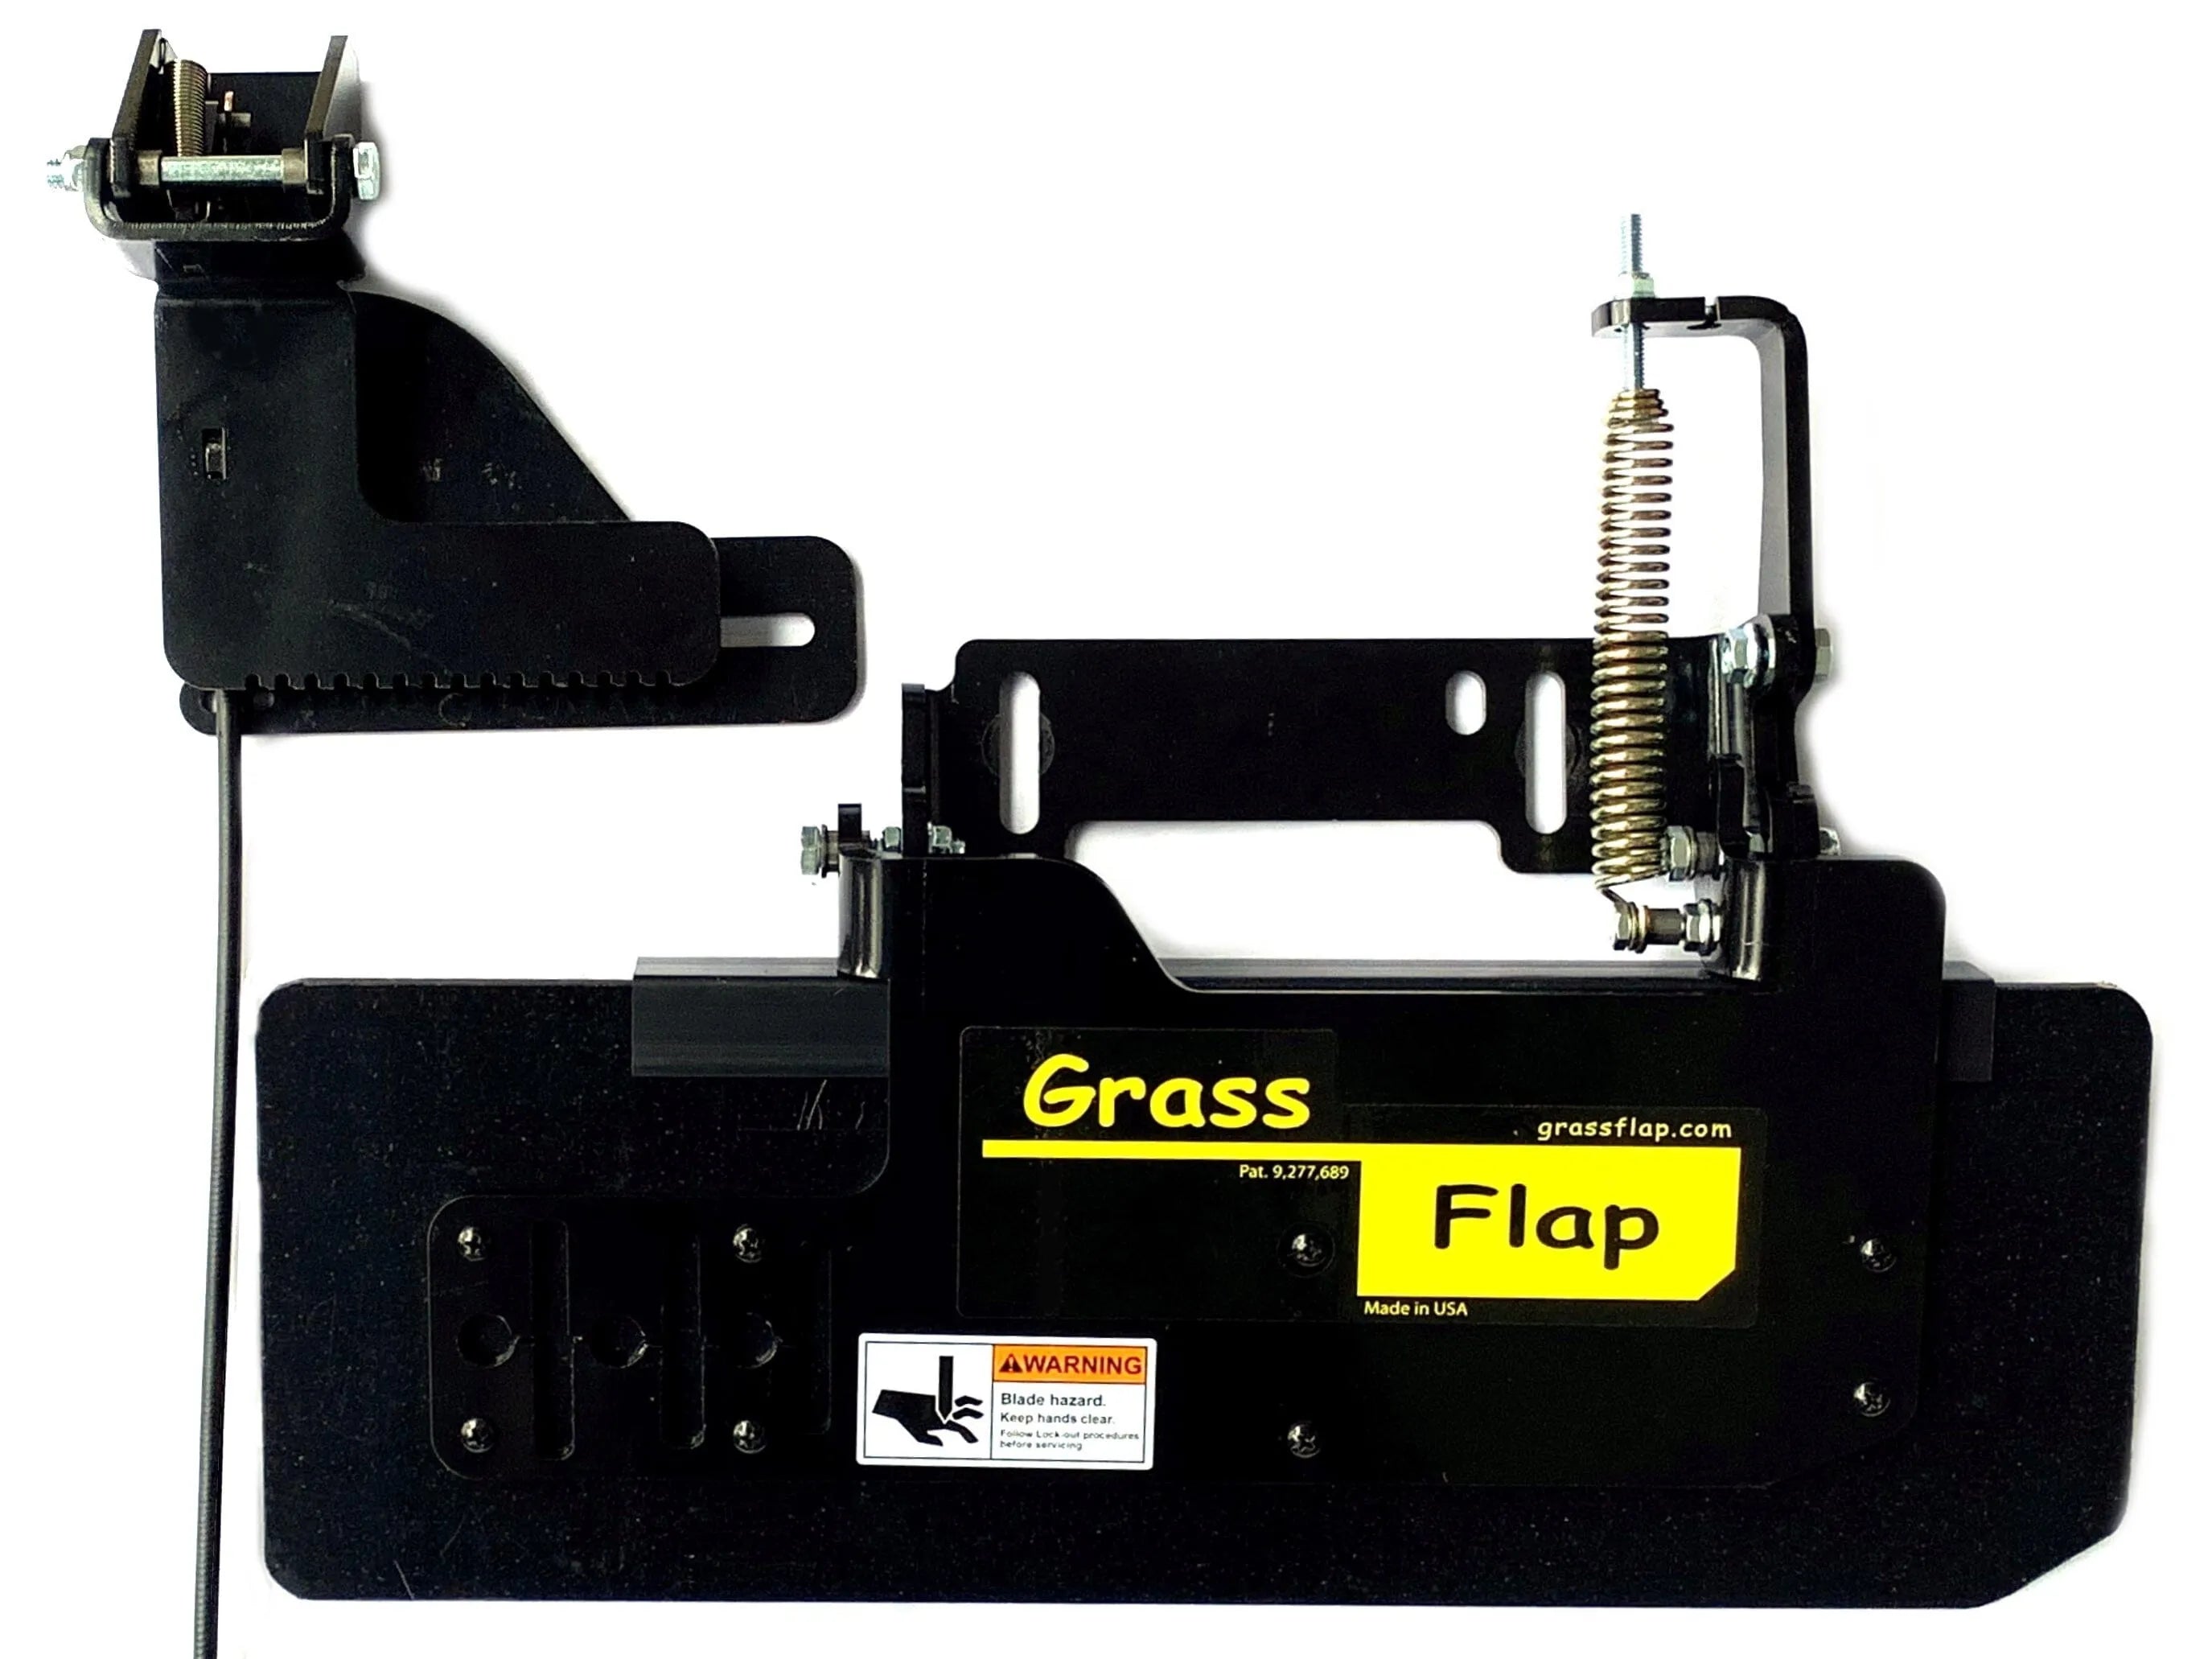 44P50-5L-A18 Low Profile Heavy-Duty GrassFlap with SEL Pedal Includes